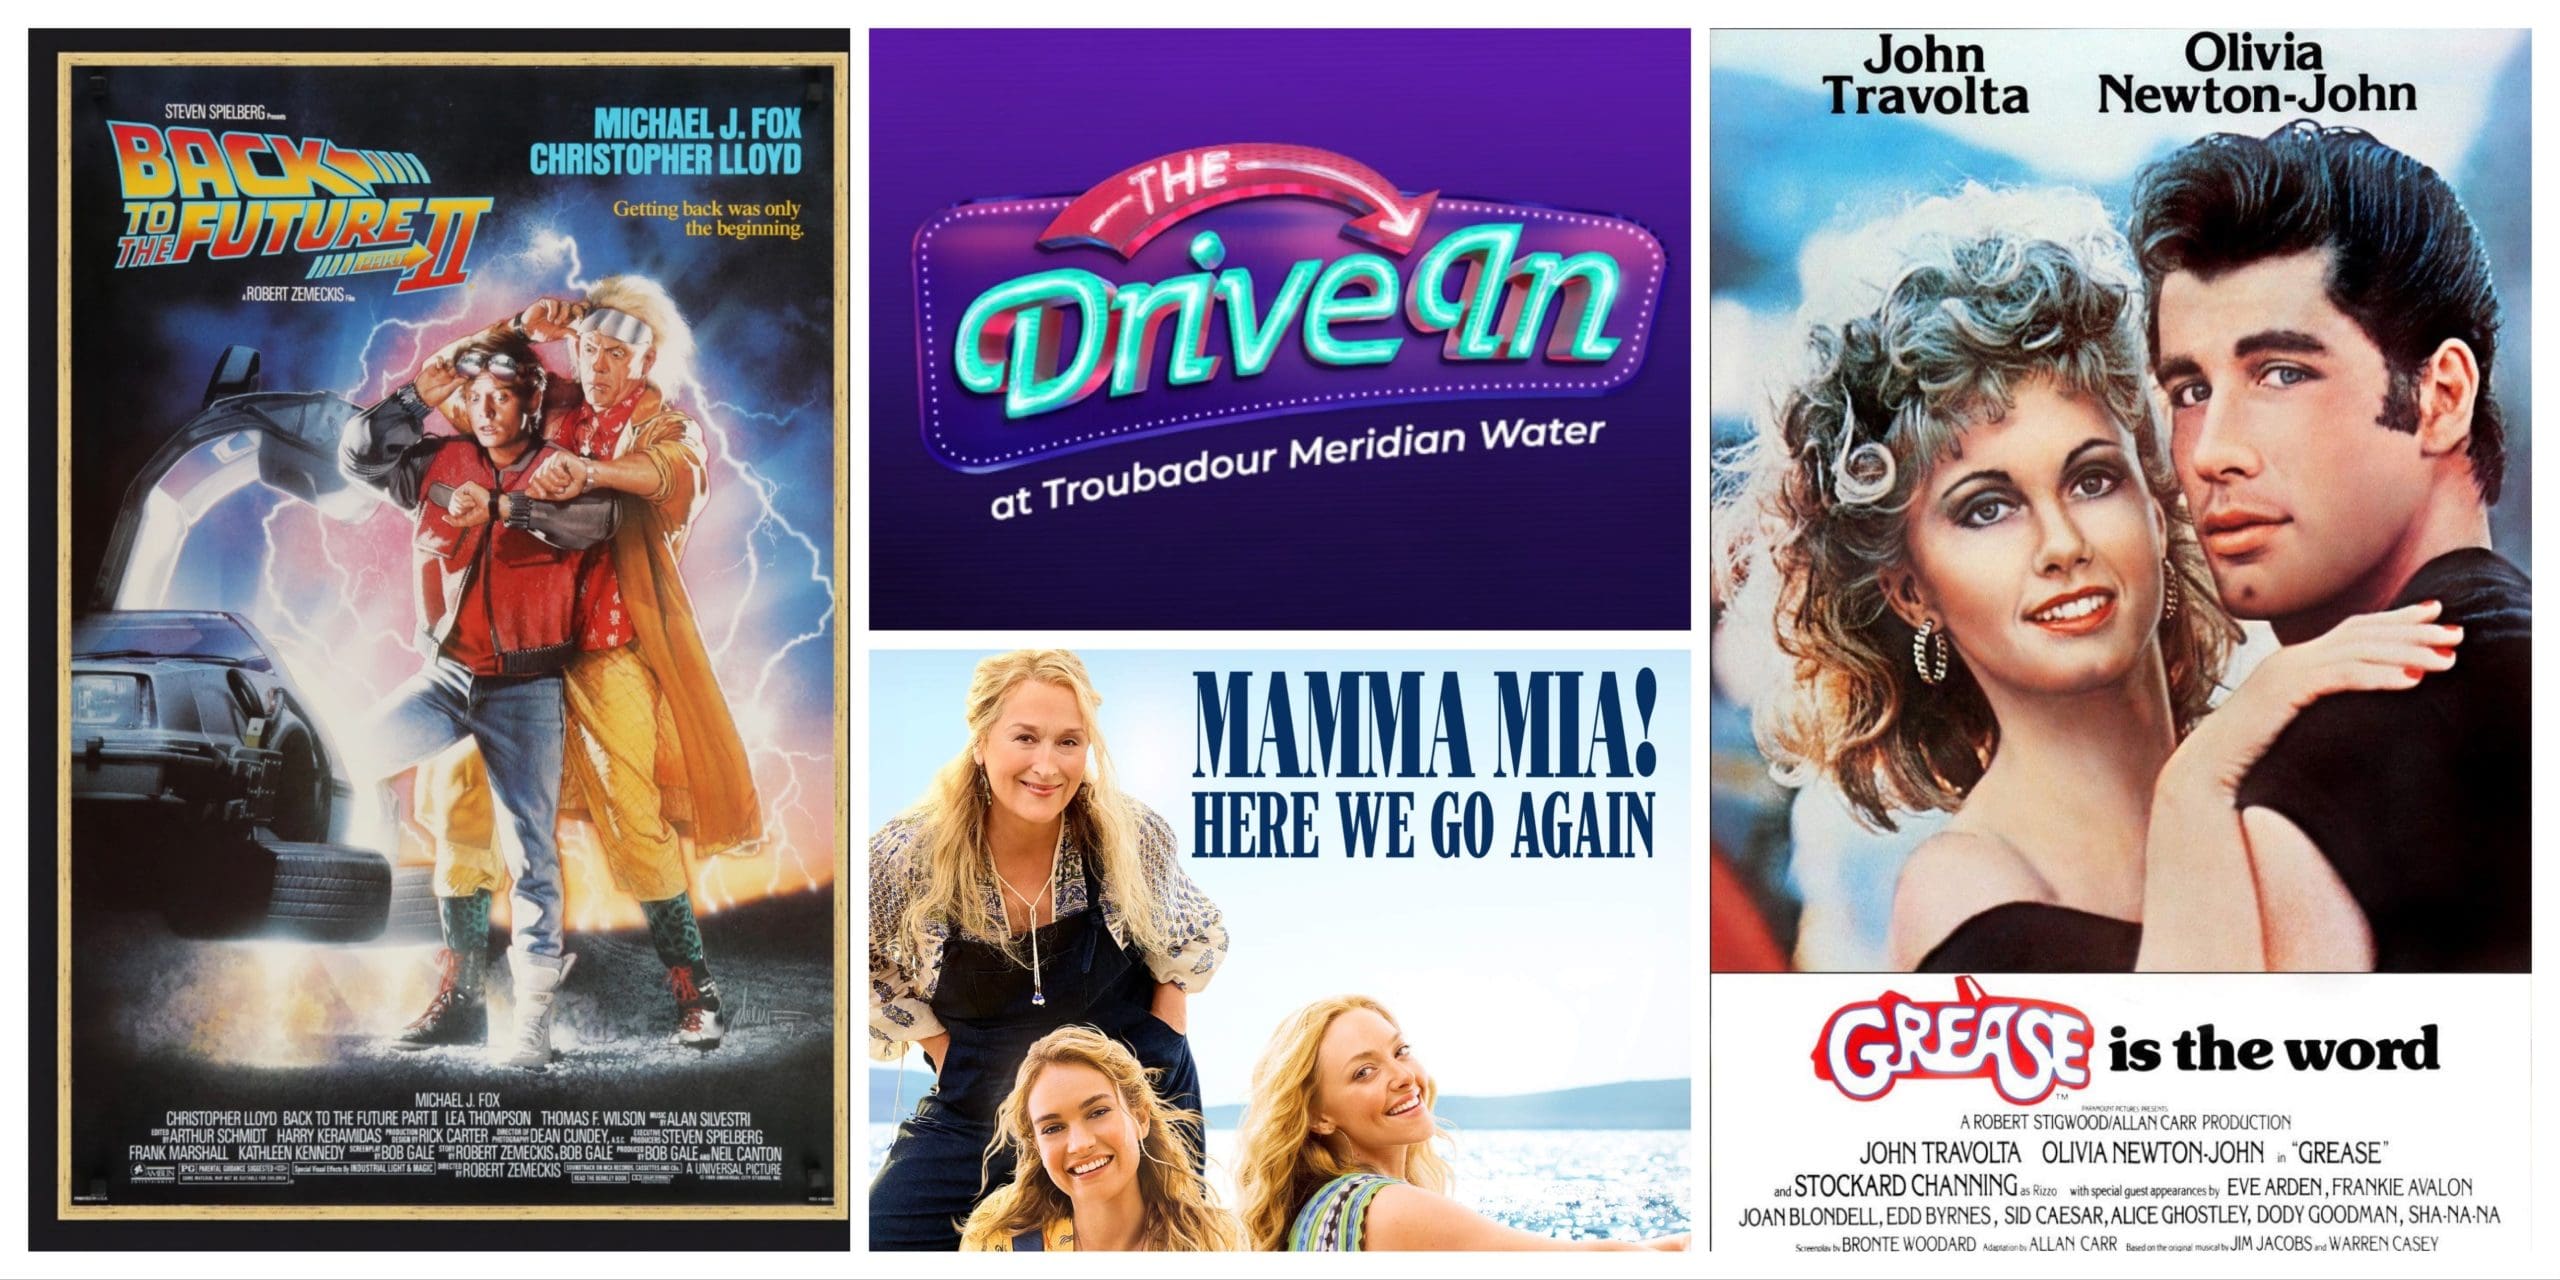 NEWS: 9 more films announced for the The Drive In @ Troubadour Meridian Water